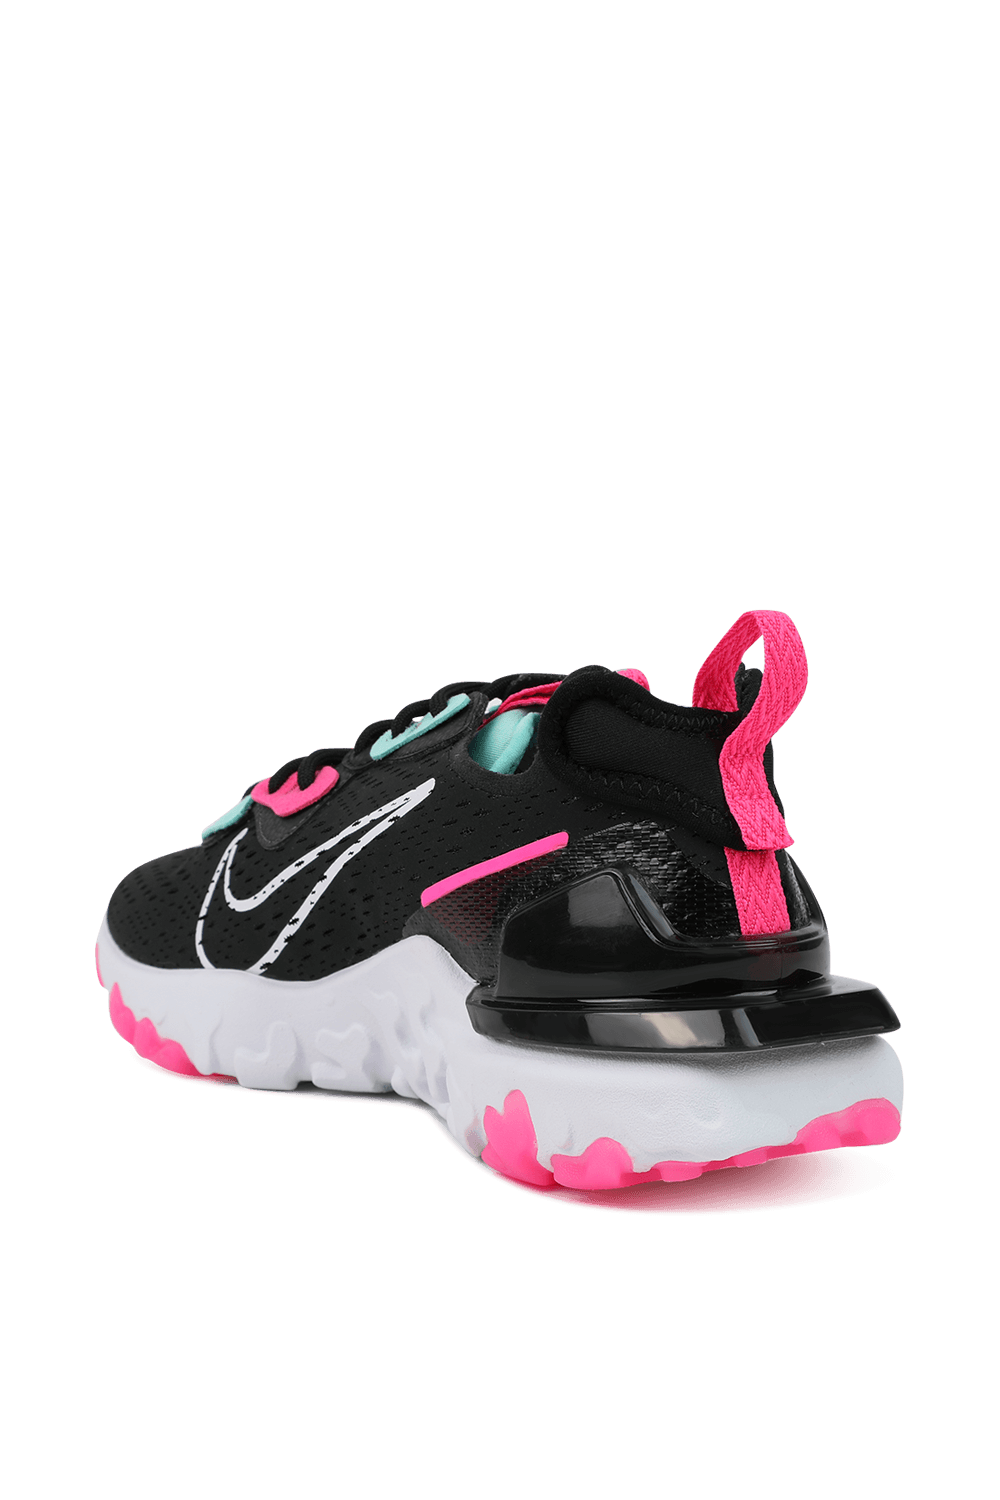 Nike React Vision in Black and Pink NIKE